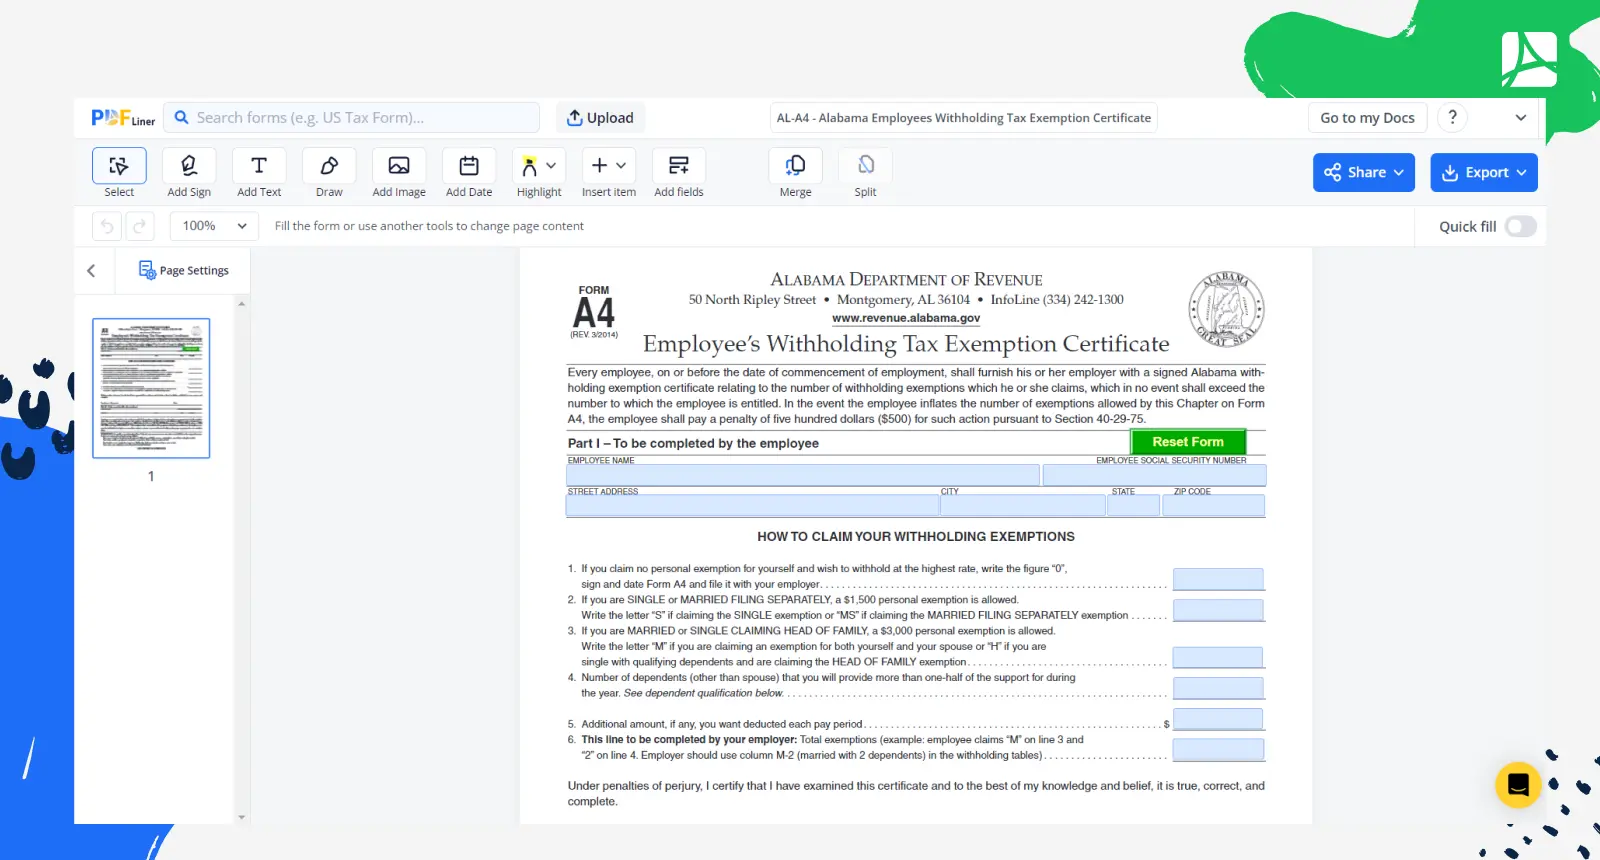 Alabama Employee’s Withholding Tax Exemption Certificate Screenshot